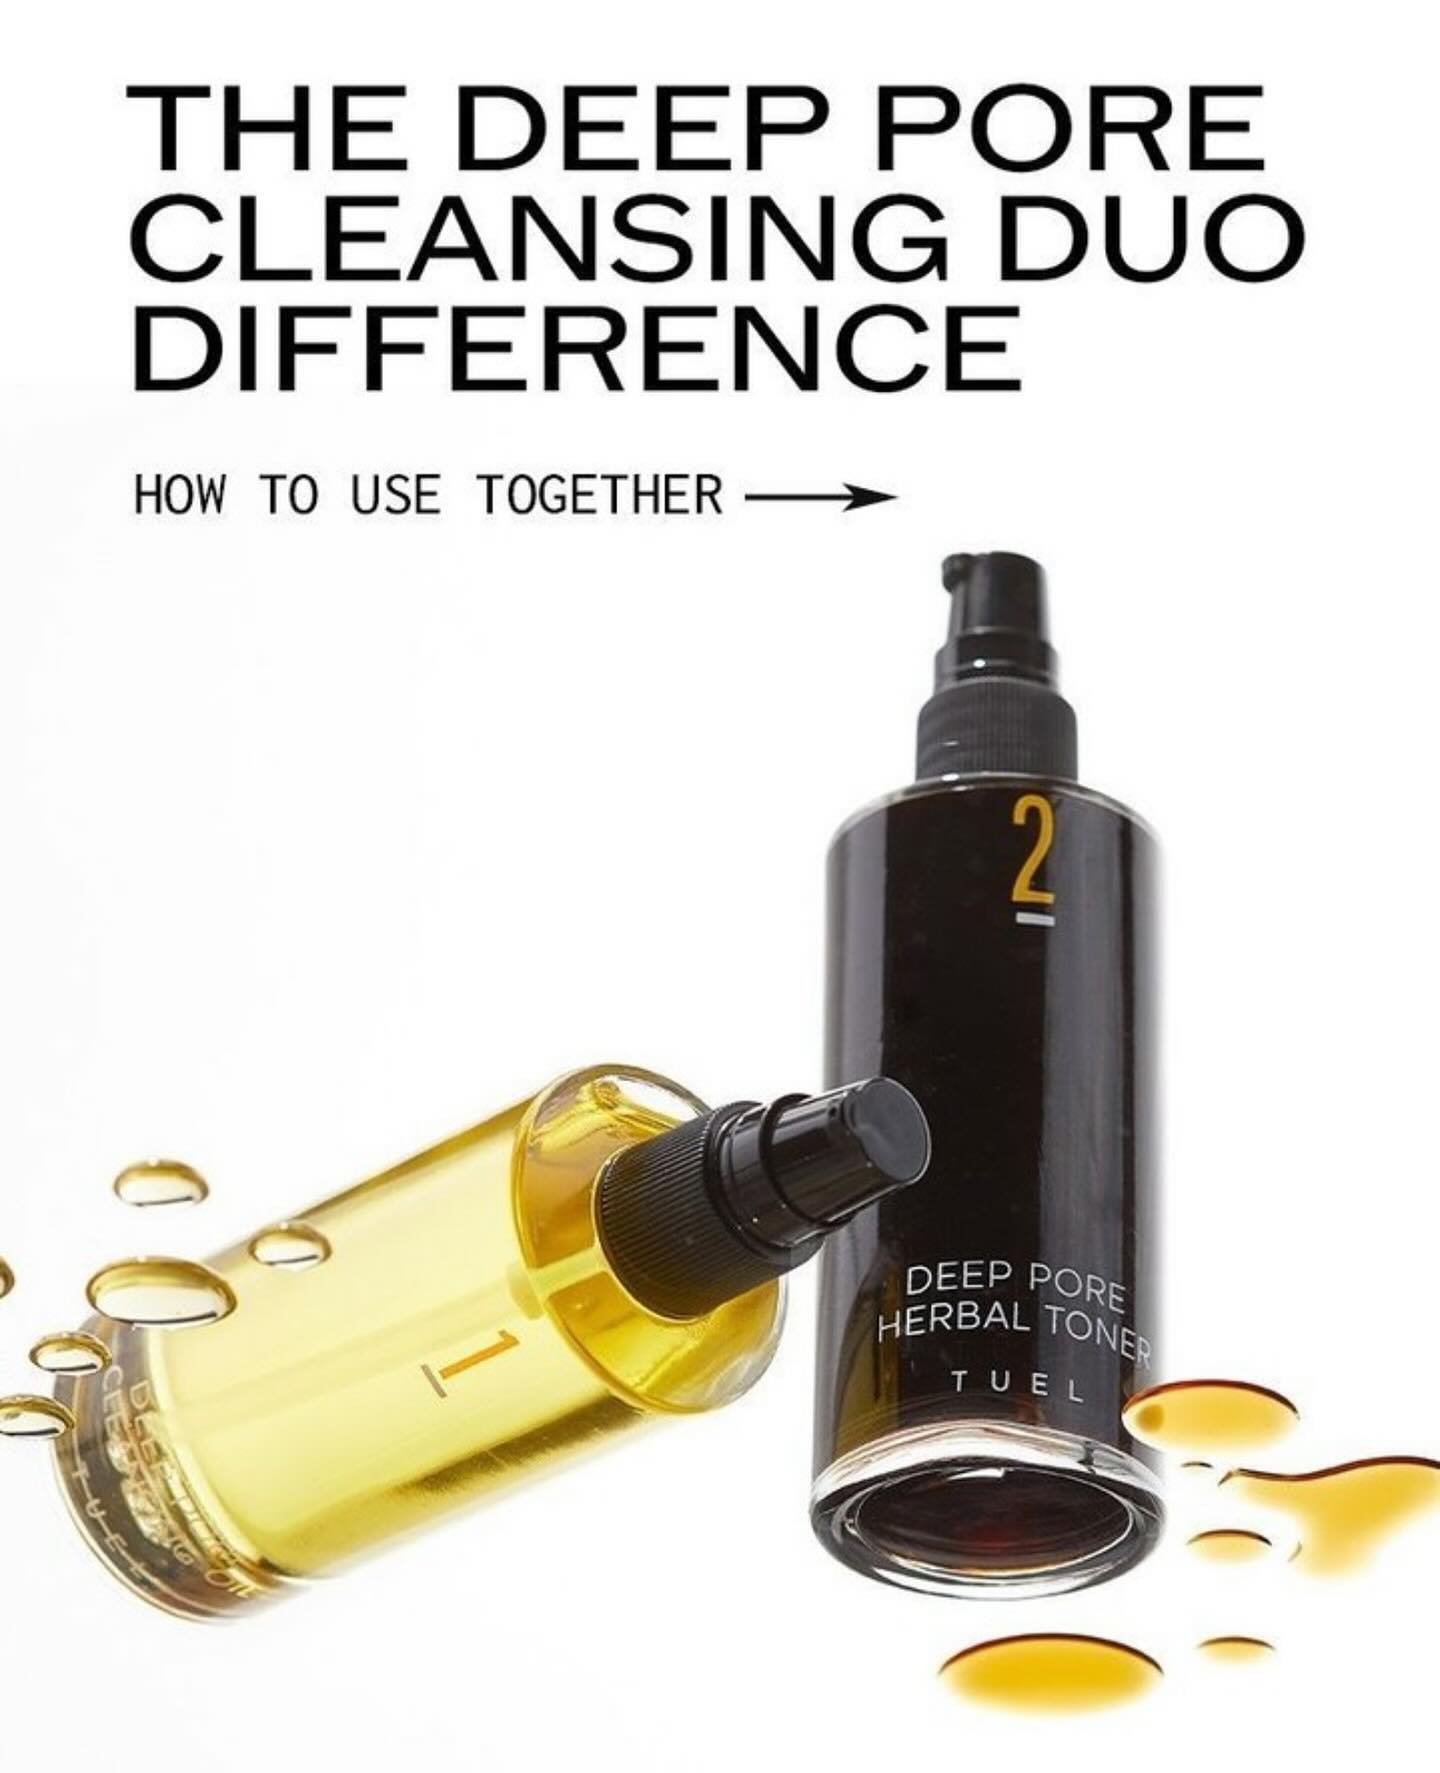 How to use our iconic Cleansing Duo! Stop by for a demo to see how it can transform your skin! 🌱
#cleansingduo #cleansingoil #herbaltoner #washyourdamnface #tuel #veganskincare #littlerockesthetician #littlerockskincare #eastvillagelr #yousramoussae